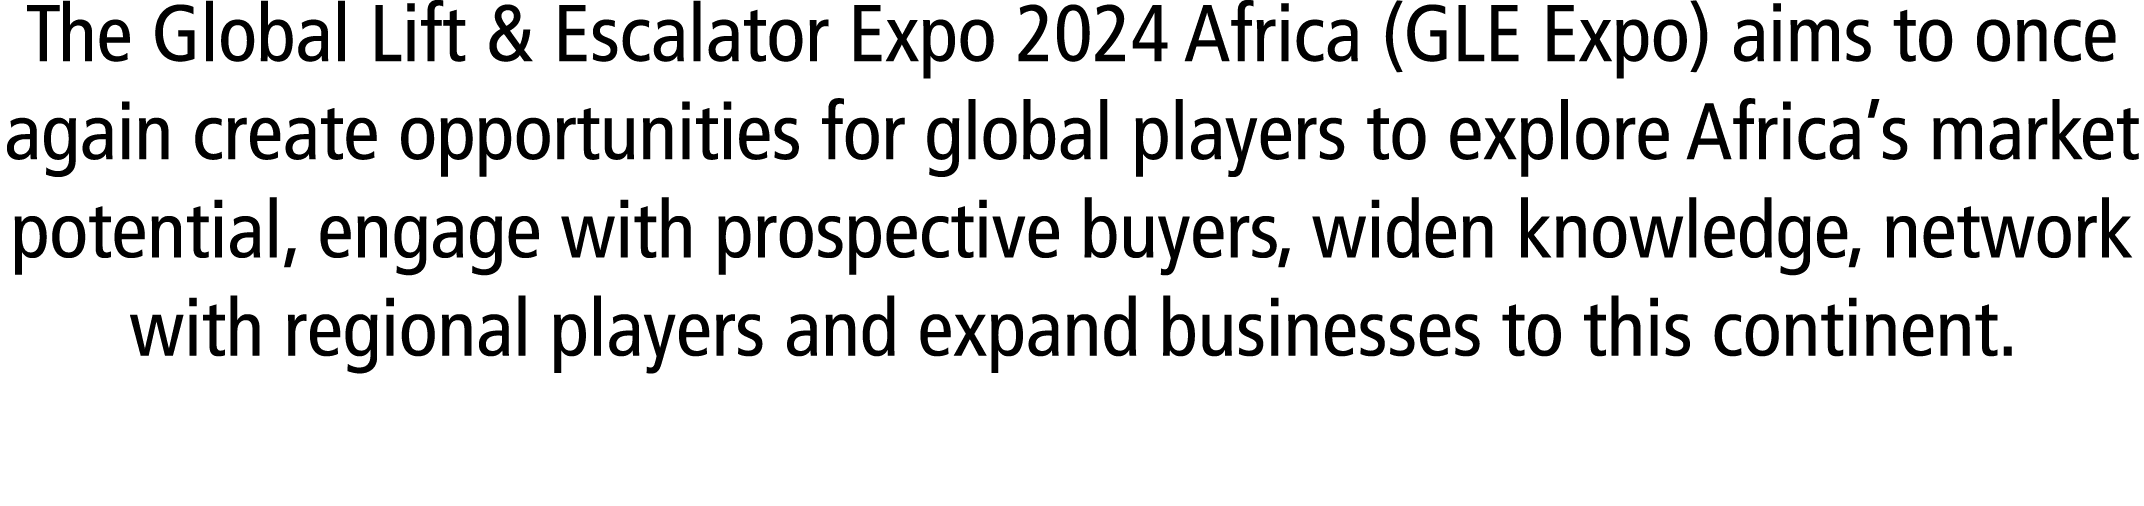 The Global Lift & Escalator Expo 2024 Africa (GLE Expo) aims to once again create opportunities for global players to...